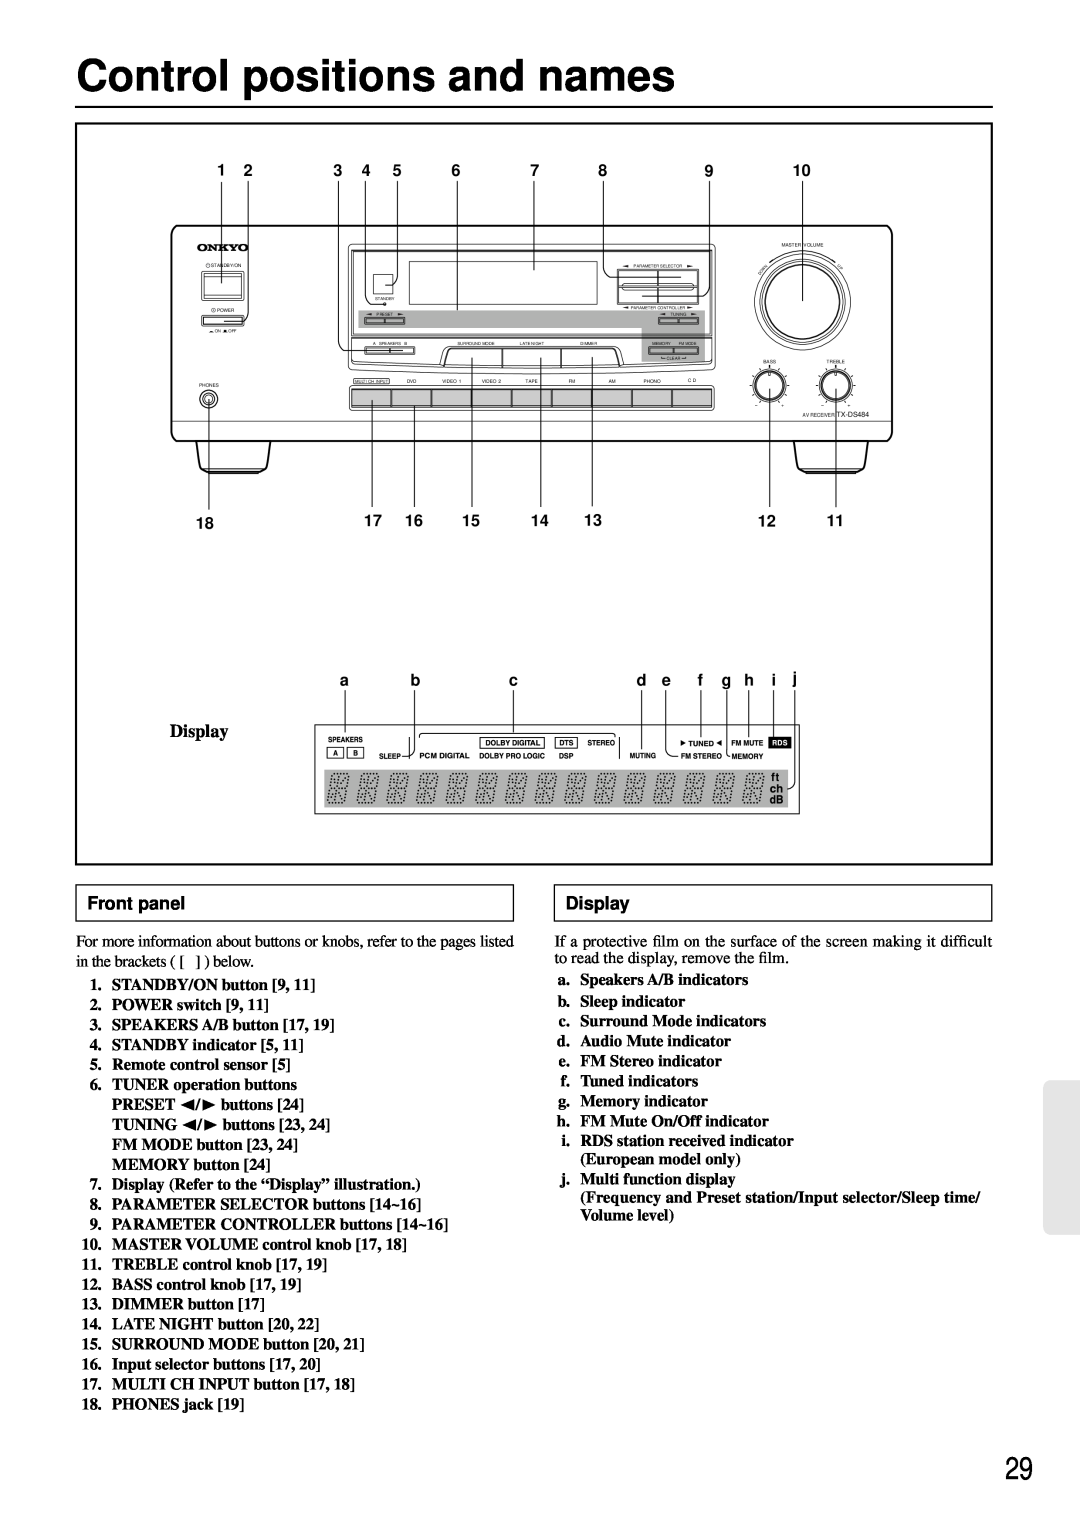 Onkyo TX-DS484 instruction manual Control positions and names, Display, Front panel 